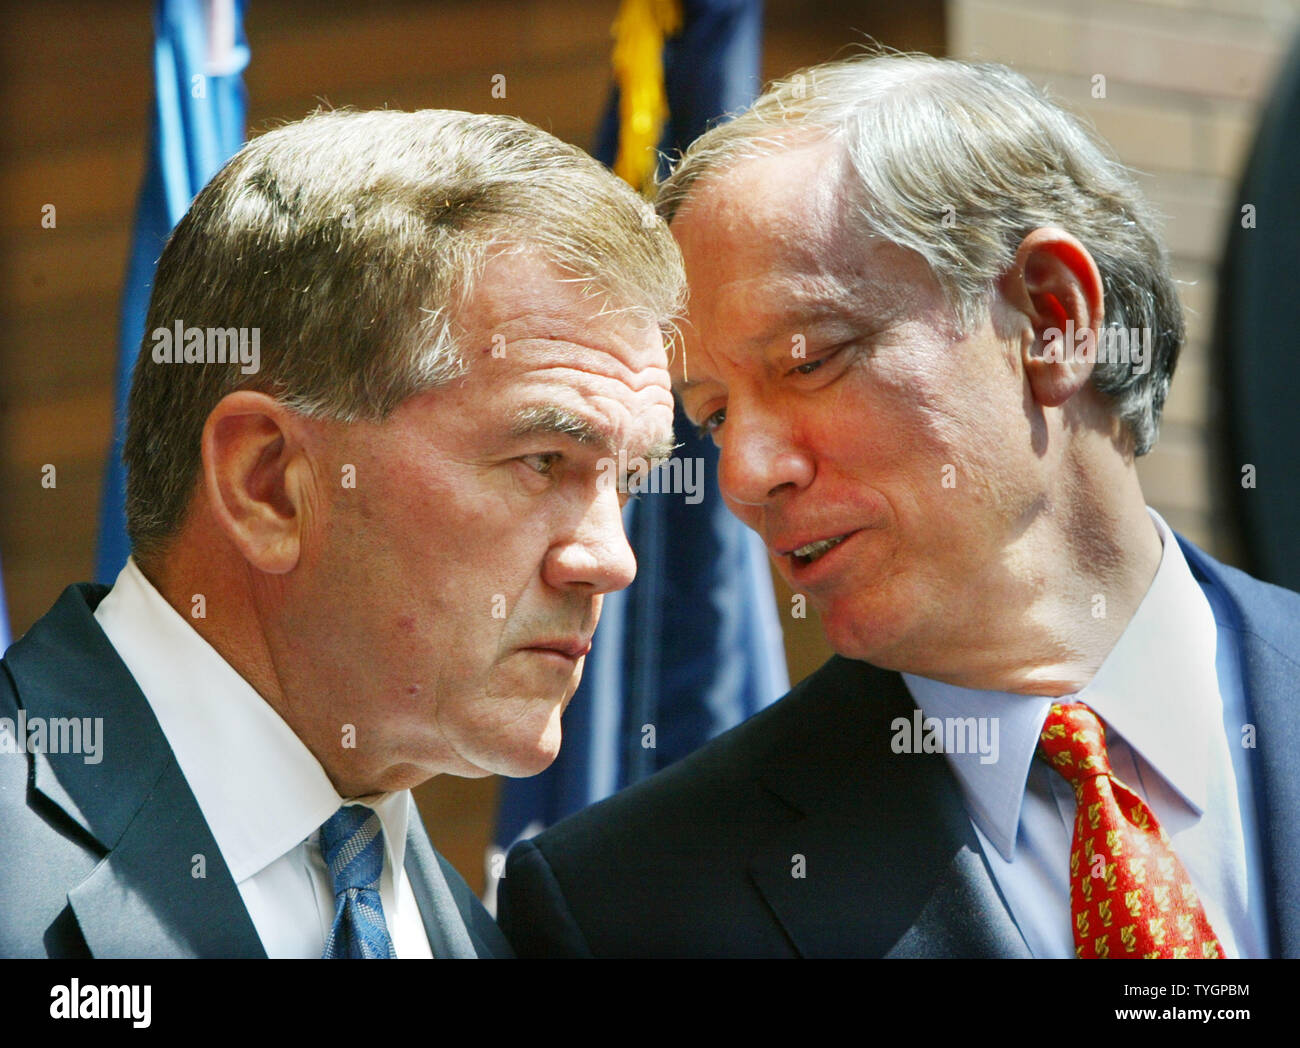 Secretary of Homeland Security Tom Ridge (L) listens to New York State governor George Pataki during a press conferance held to announce some of the special security measures that will be in place for the Republican National Convention and the demonstrators August 25, 2004 in New York City.  (UPI Photo/Monika Graff) Stock Photo